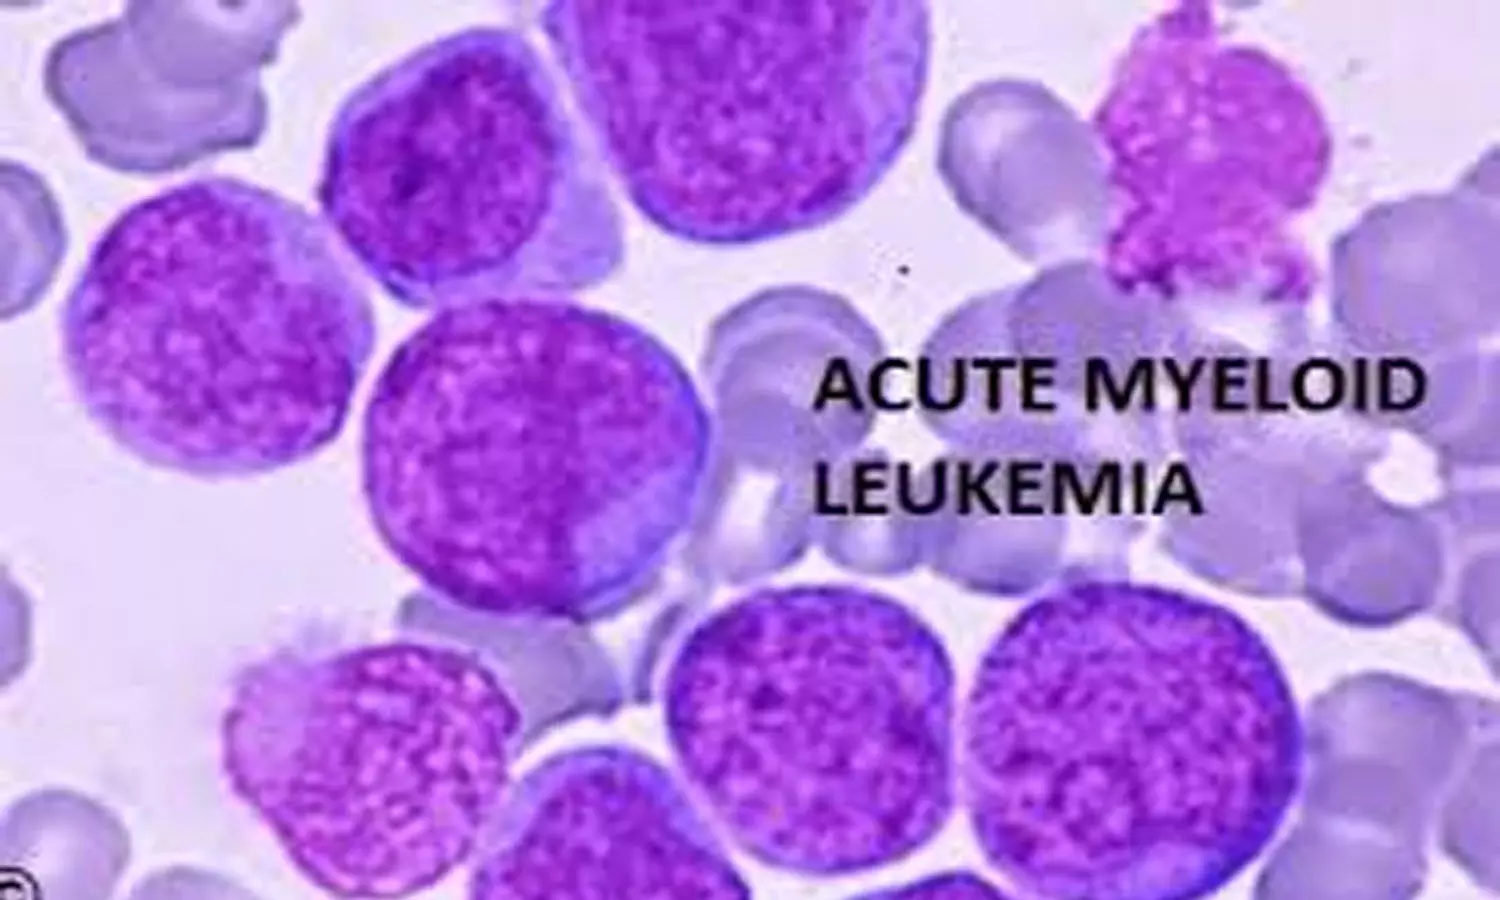 Venetoclax combination therapies found effective against challenging subtypes of acute myeloid leukemia